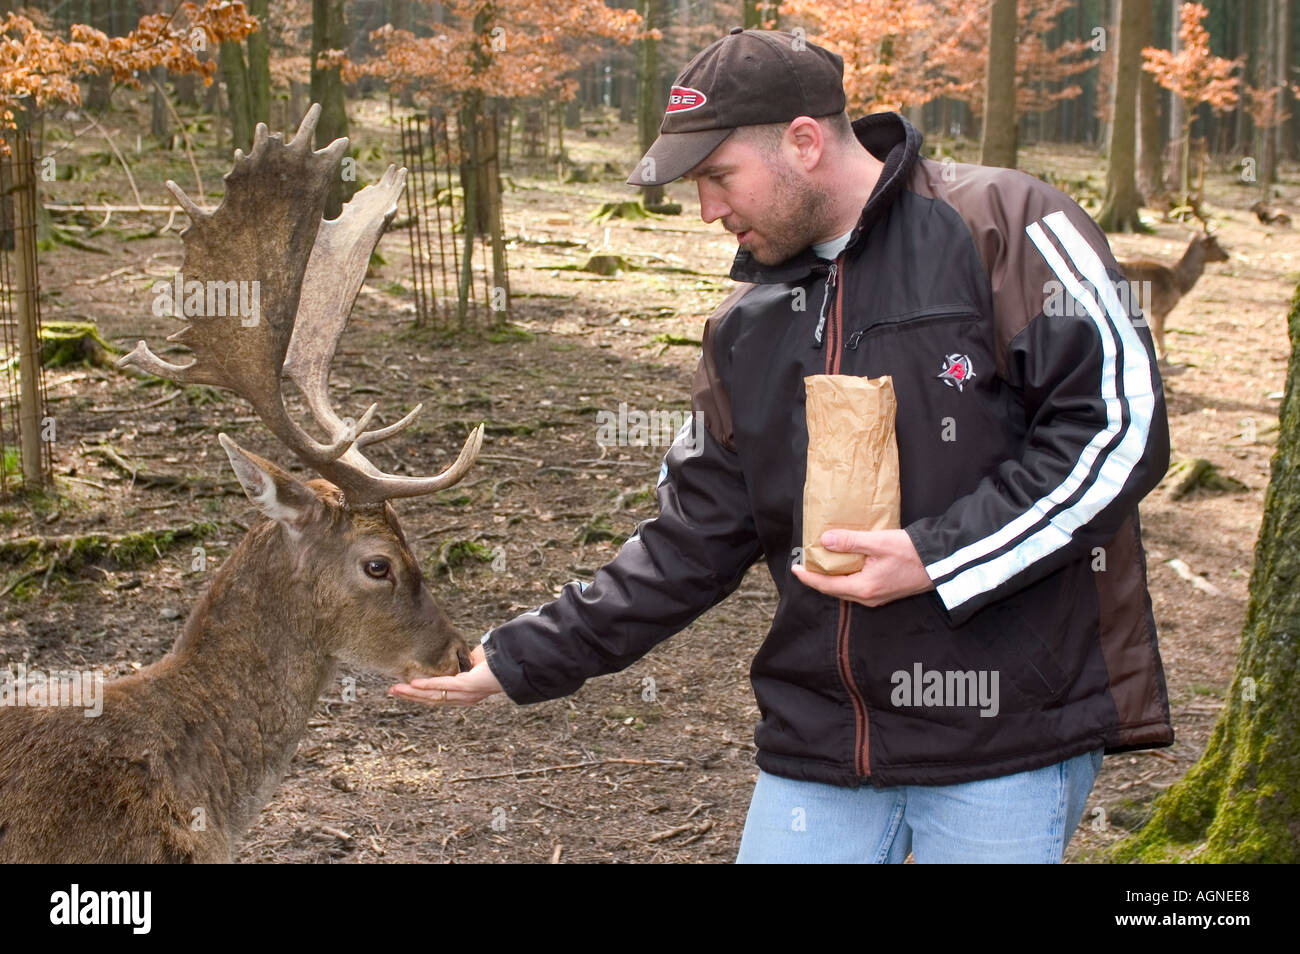 Poing by Munich Bavaria leisure park Poing man is feeding a deer MR Stock Photo